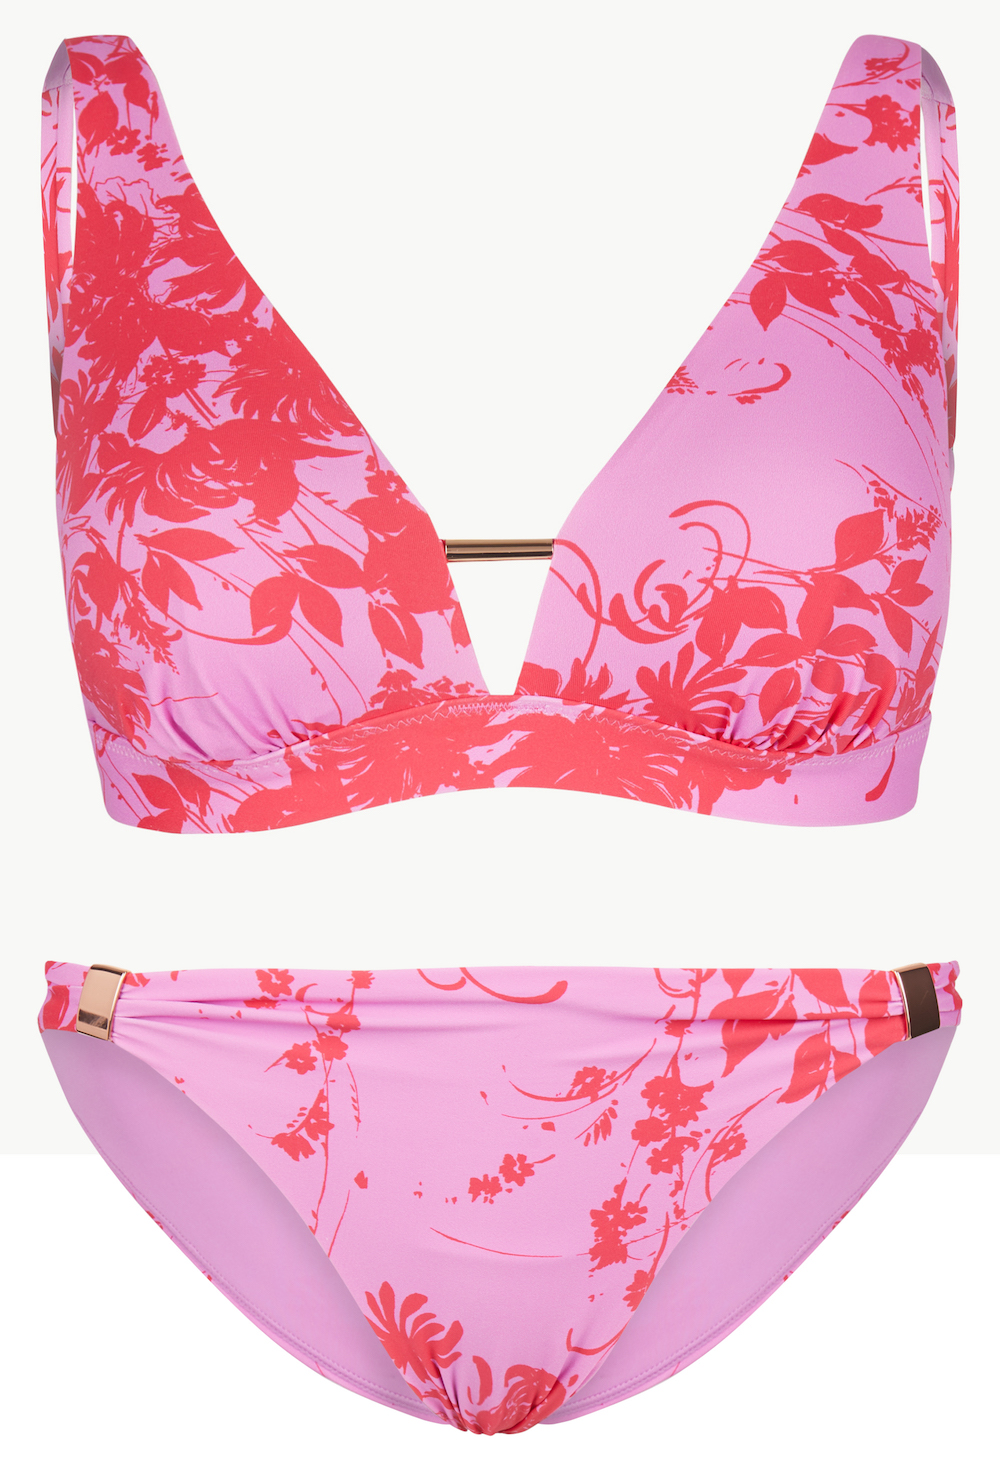 Jetting Off For Some Winter Sun? These Are The Bikinis You Need To Take ...